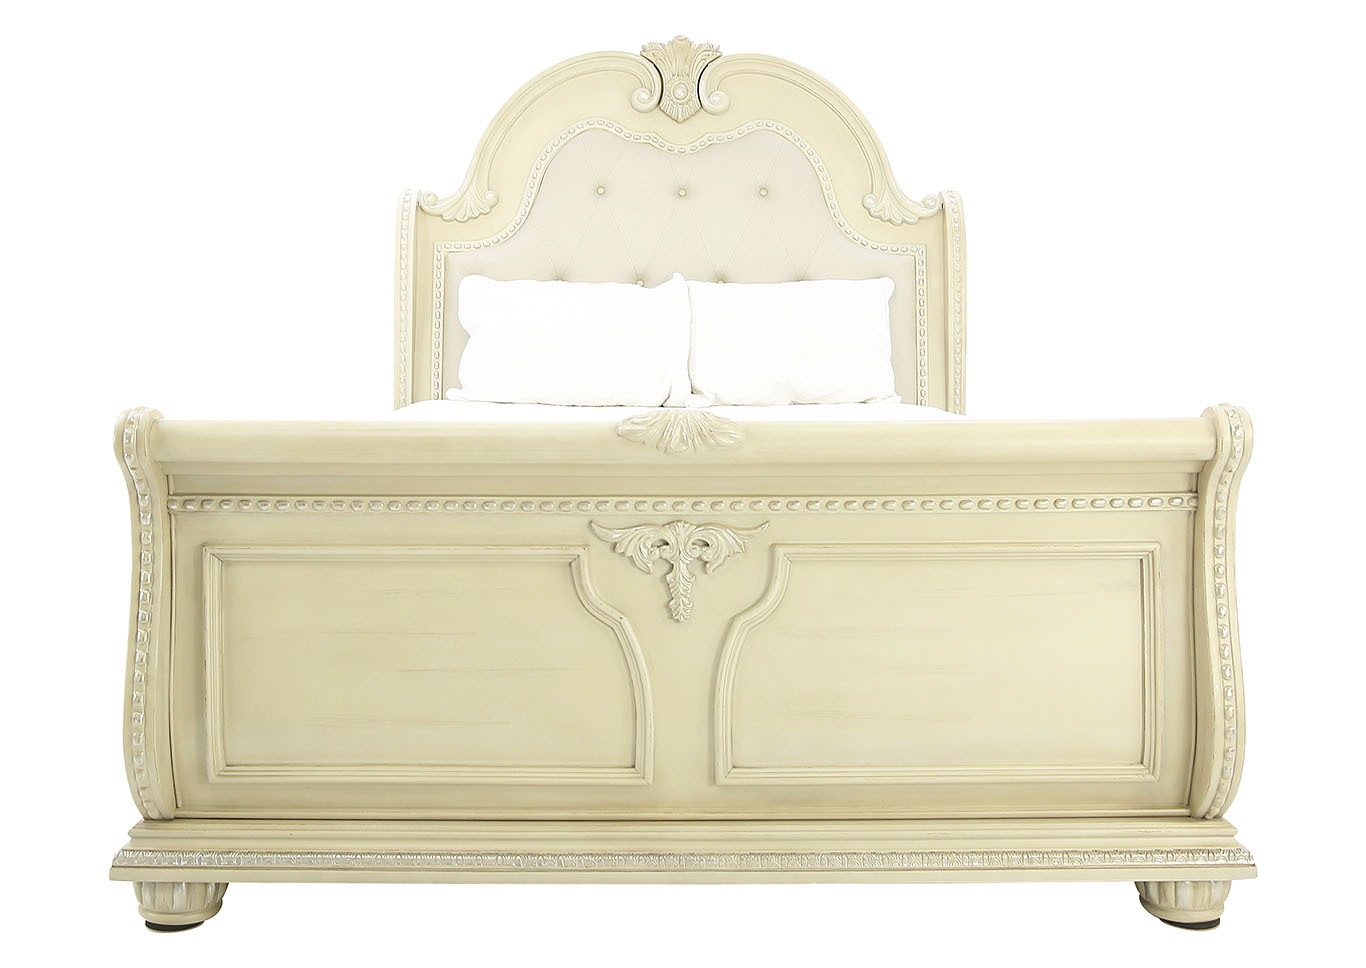 Stanley Antique White King Bed Ivan, Antique White King Bed